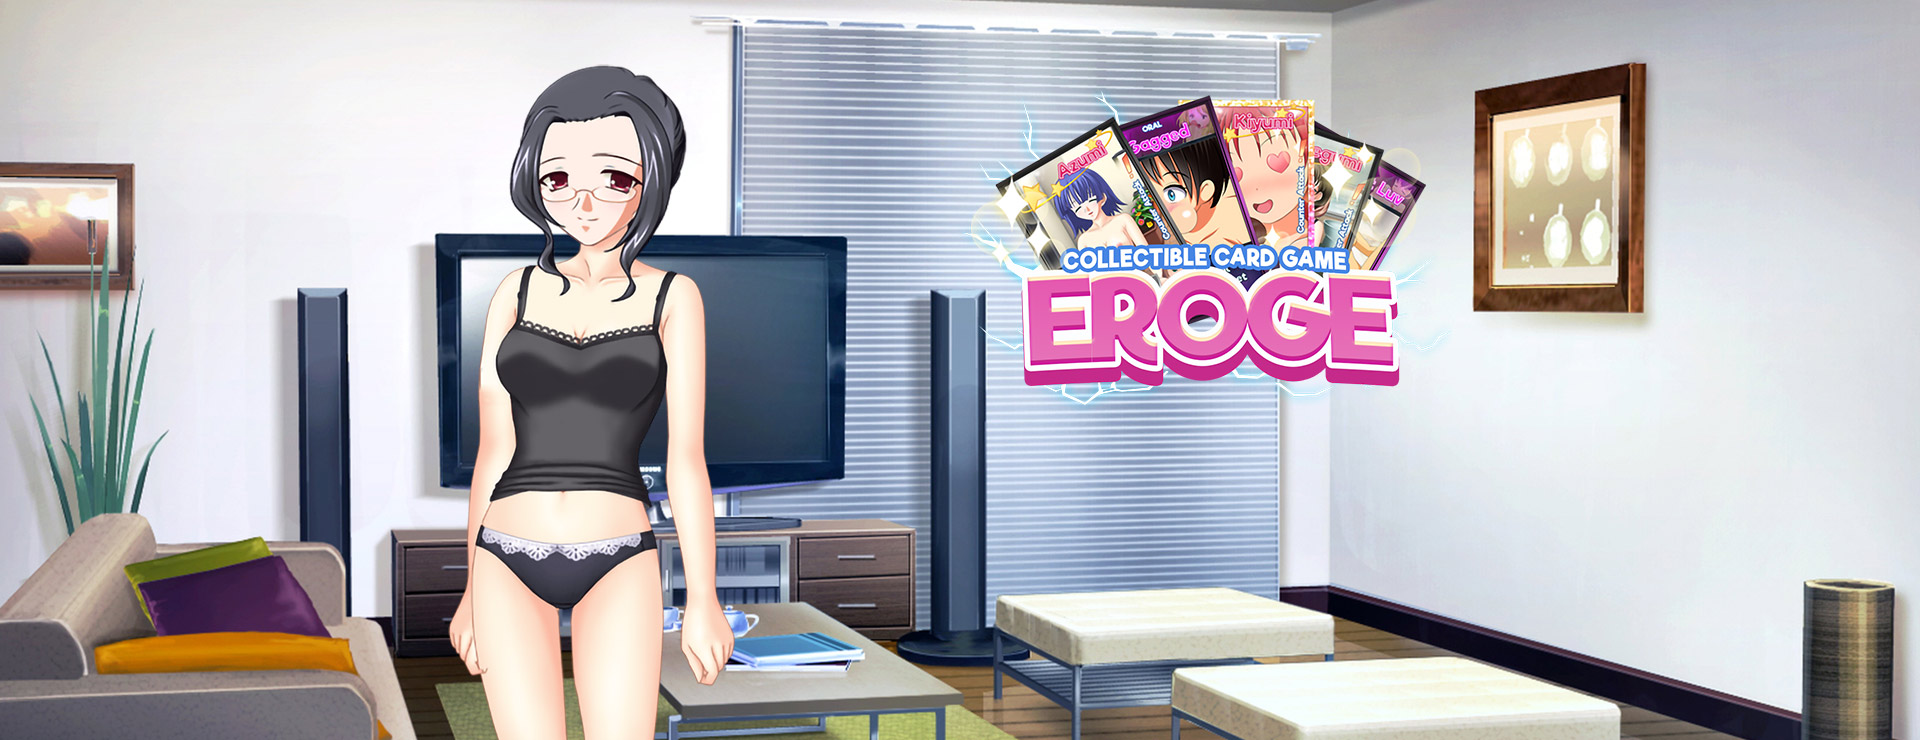 Collectible Card Game Eroge - Strategy Game